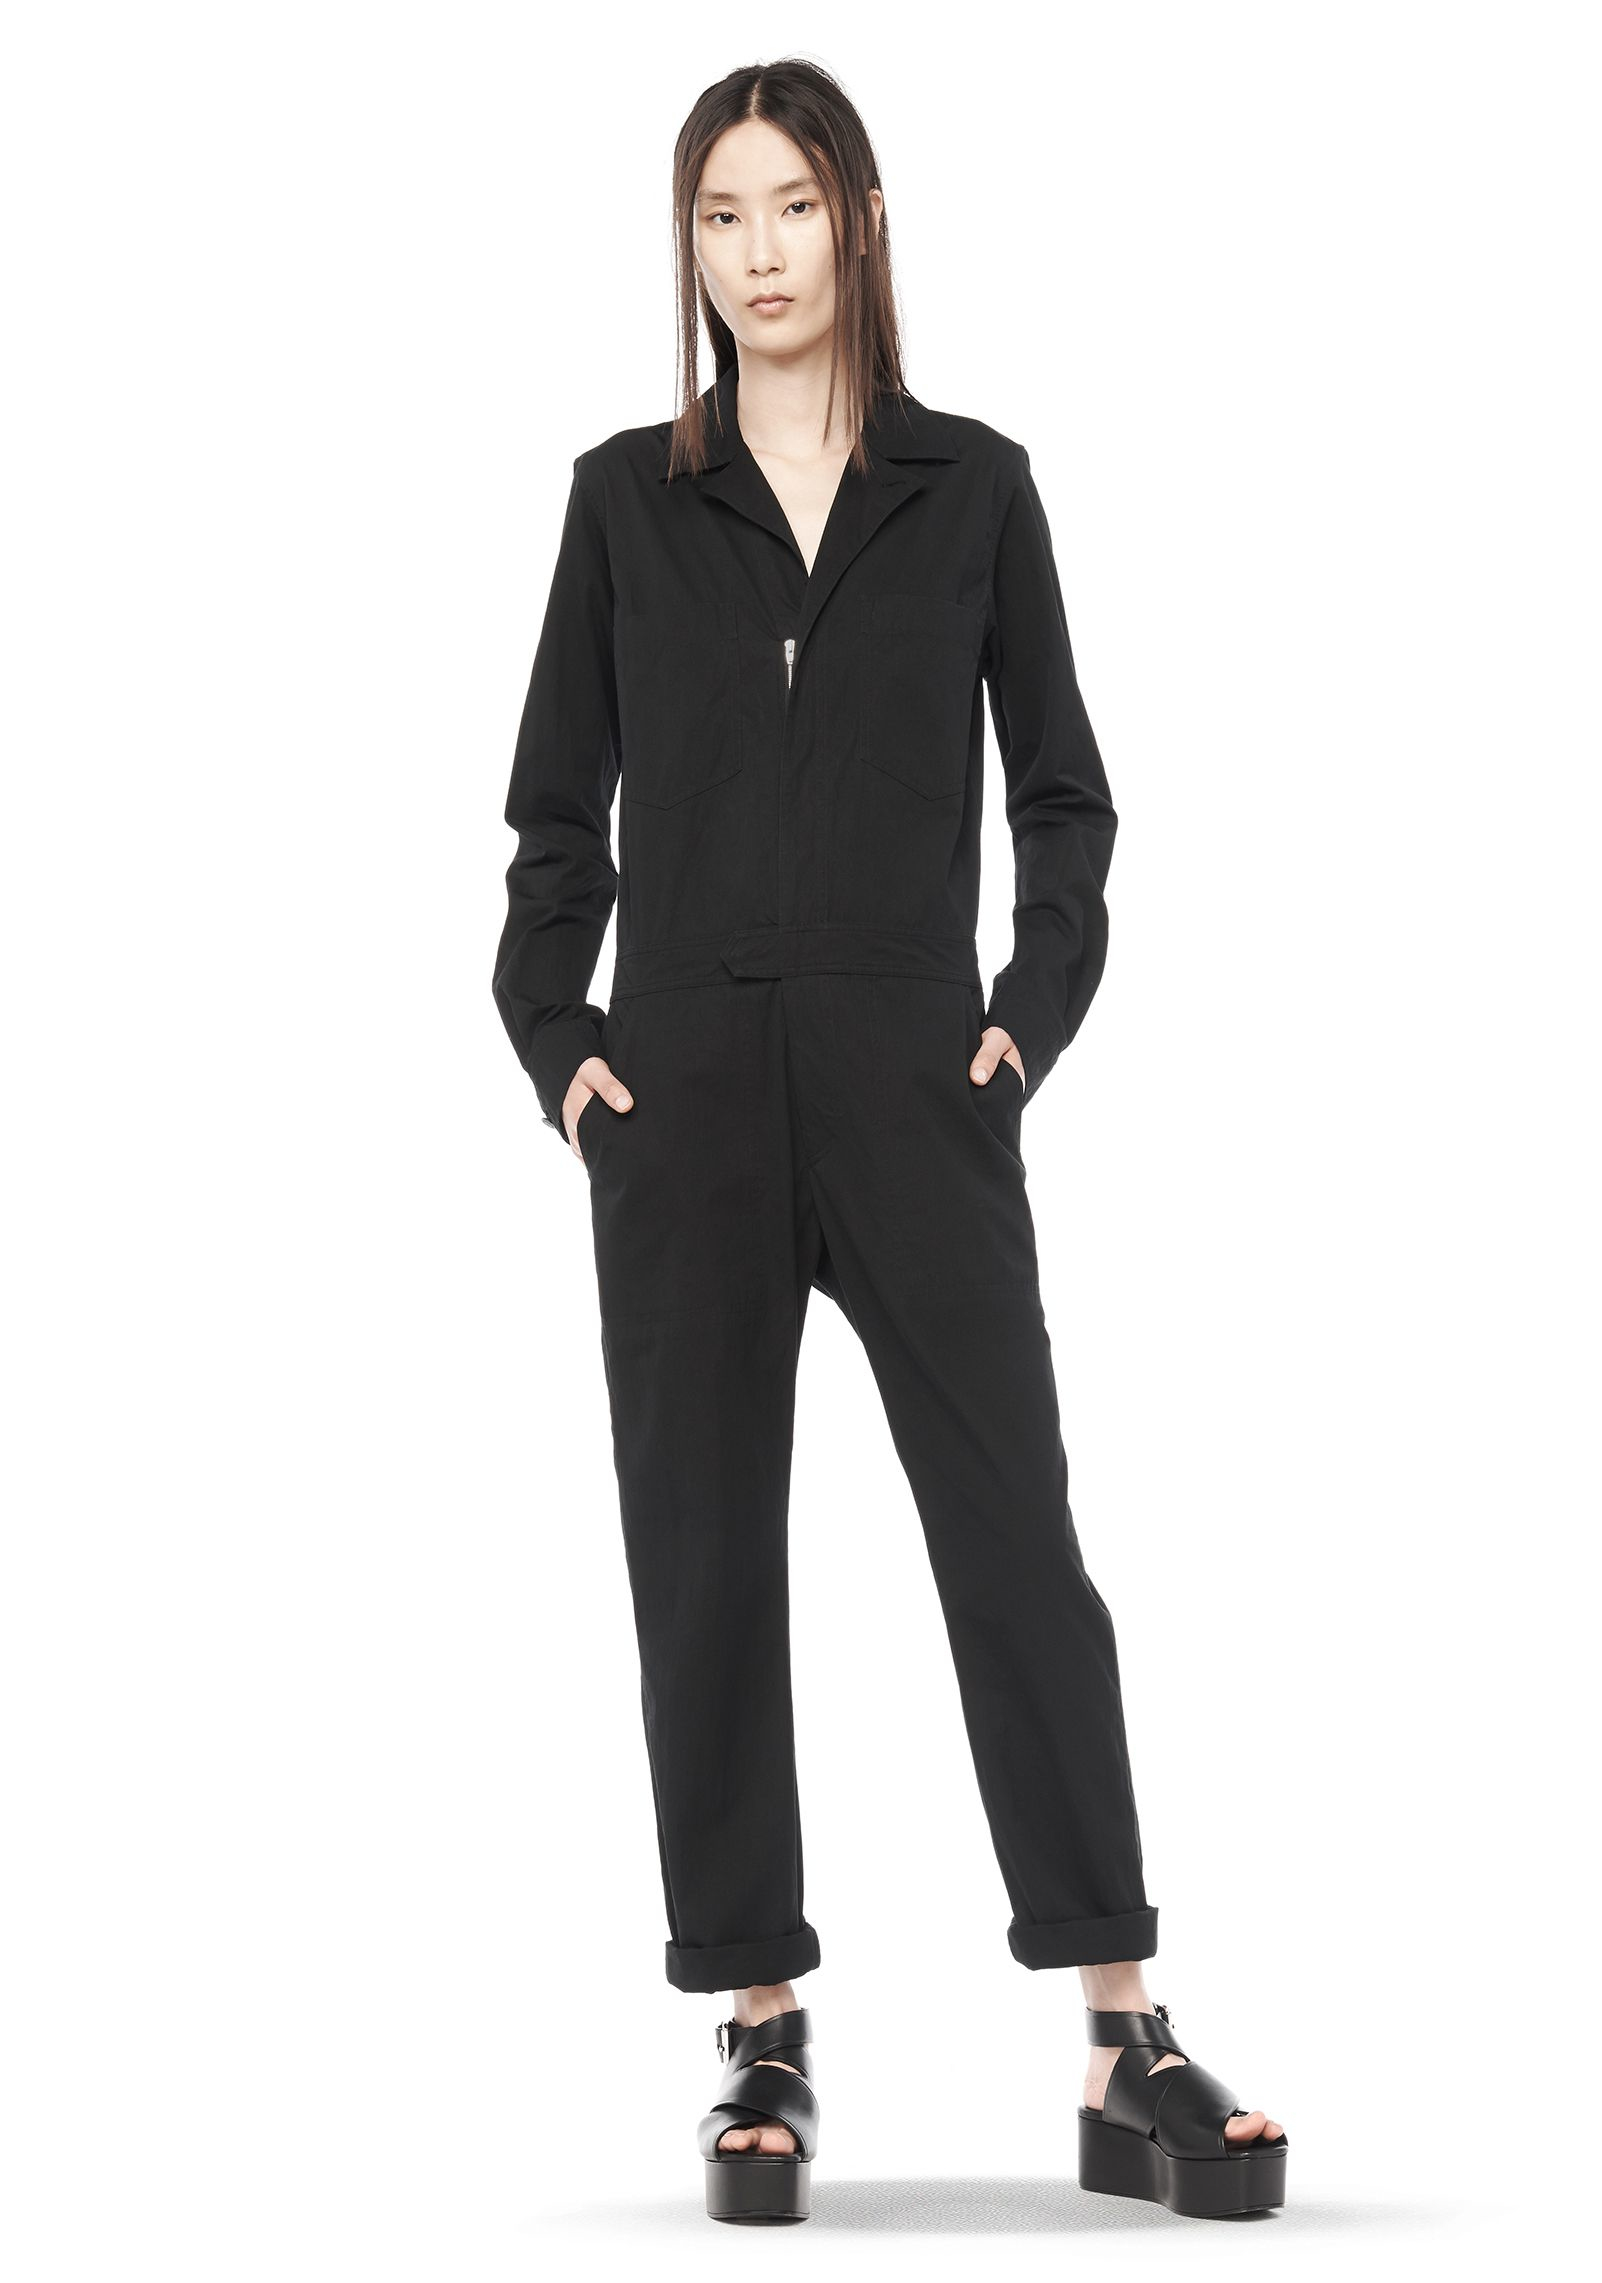 Lyst - T By Alexander Wang Nylon Long Sleeve Collared Flight Suit in Black